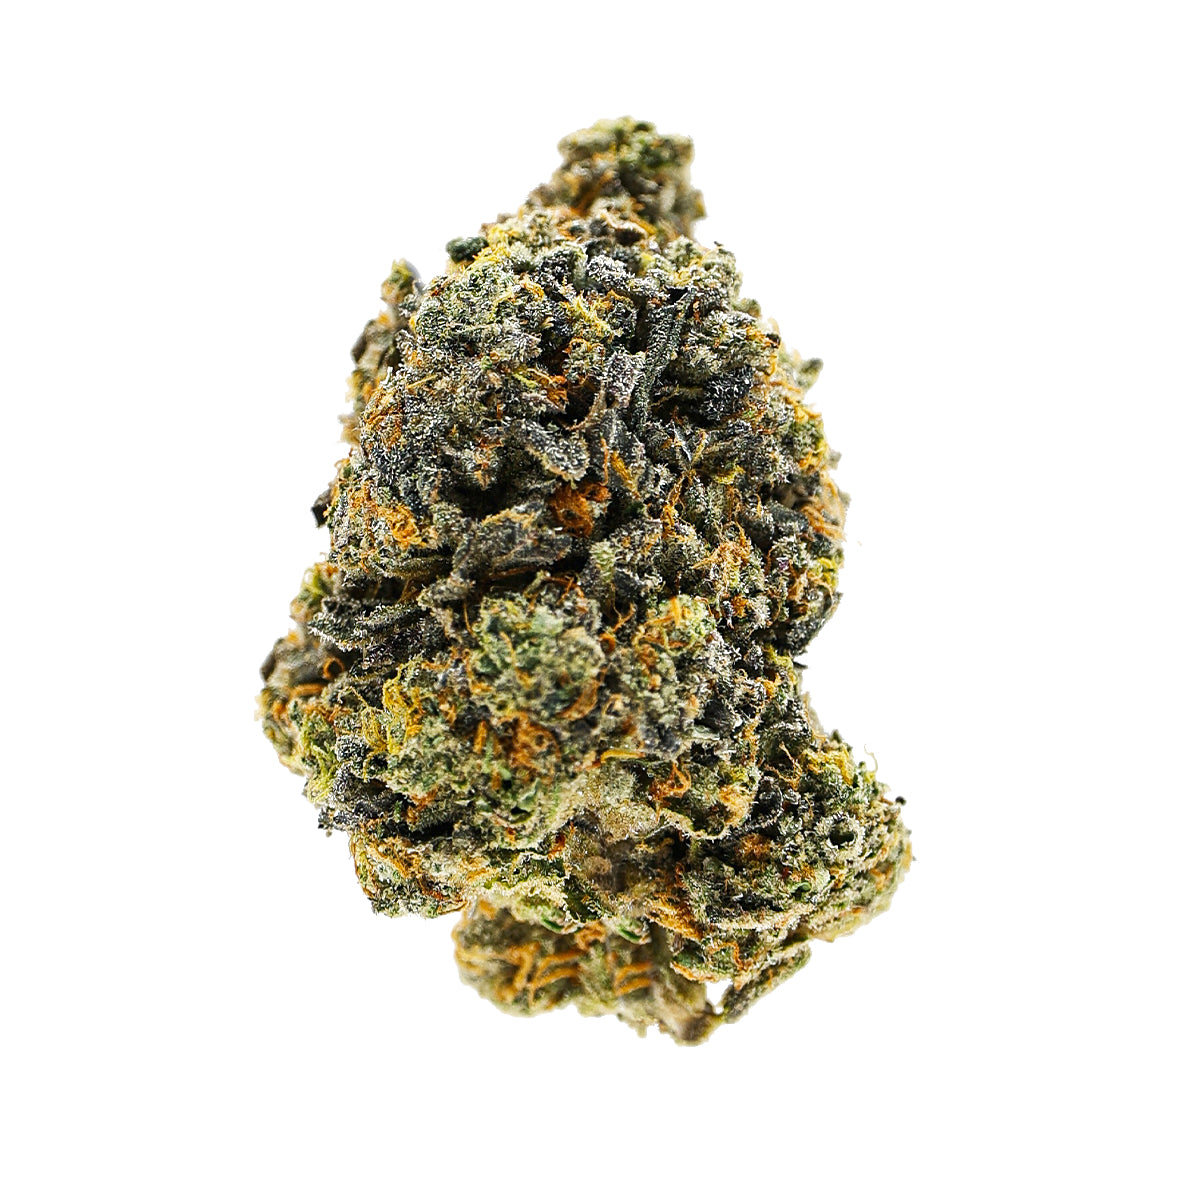 Georgia Pie THCa Hybrid Premium Hemp Flower - Light green dense nugs with orange pistils and hints of purple throughout. This potent hybrid has a sweet scent similar to your grandma’s peach pie. The most abundant terpene in Georgia Pie is caryophyllene, followed by limonene and humulene. Available in 3.5g size jars